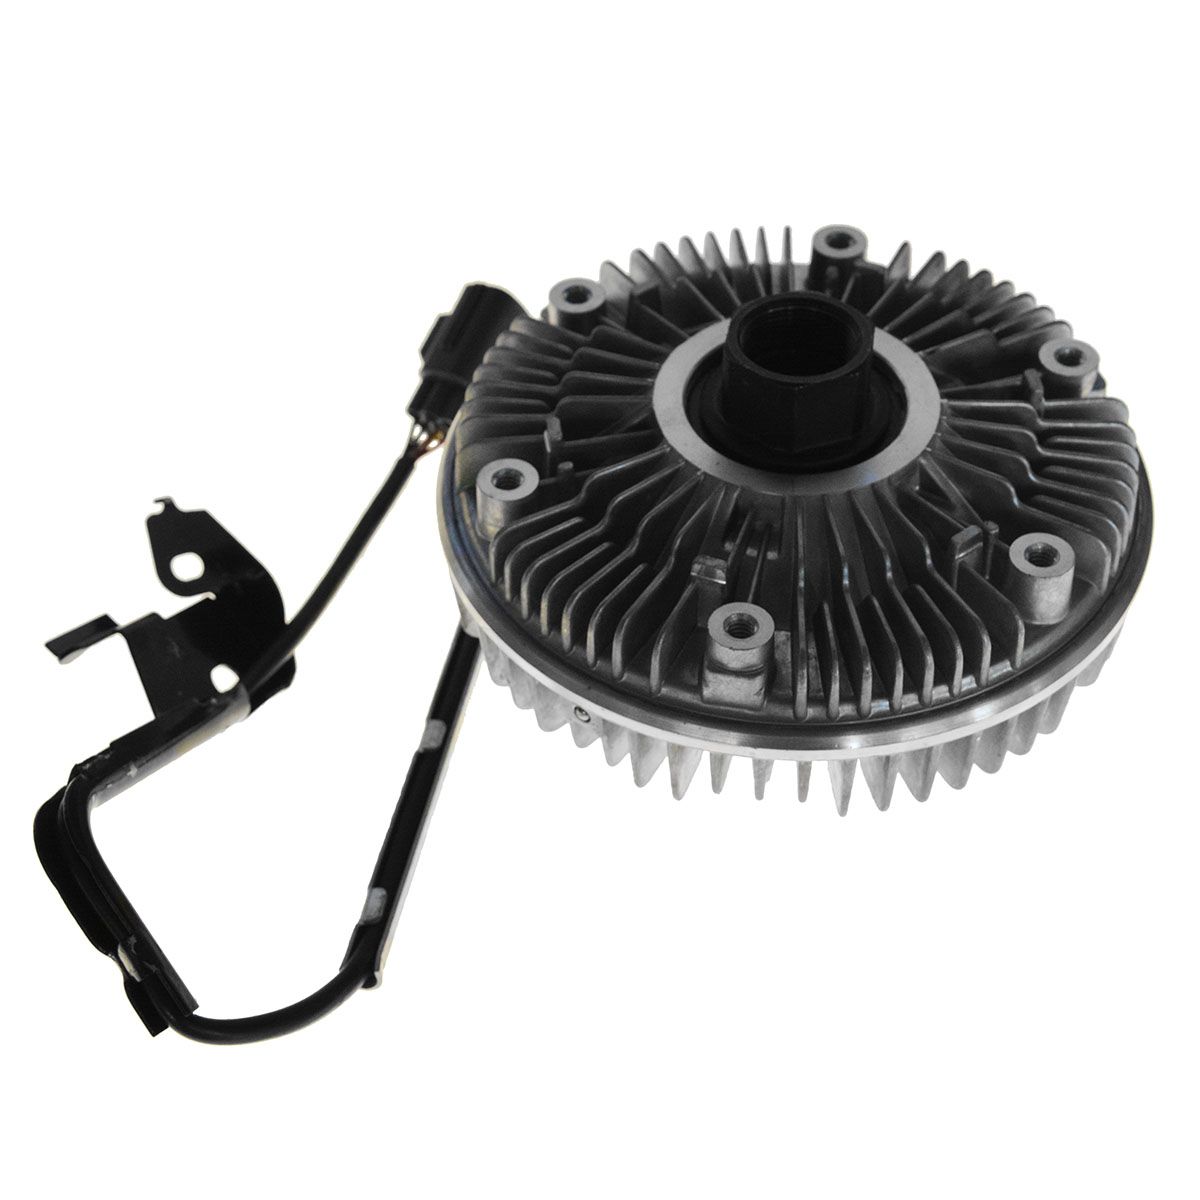 Electric Radiator Cooling Fan Clutch for 04-09 Dodge Truck Ram Cummins 2006 Dodge Ram 5.9 Cummins Fan Clutch